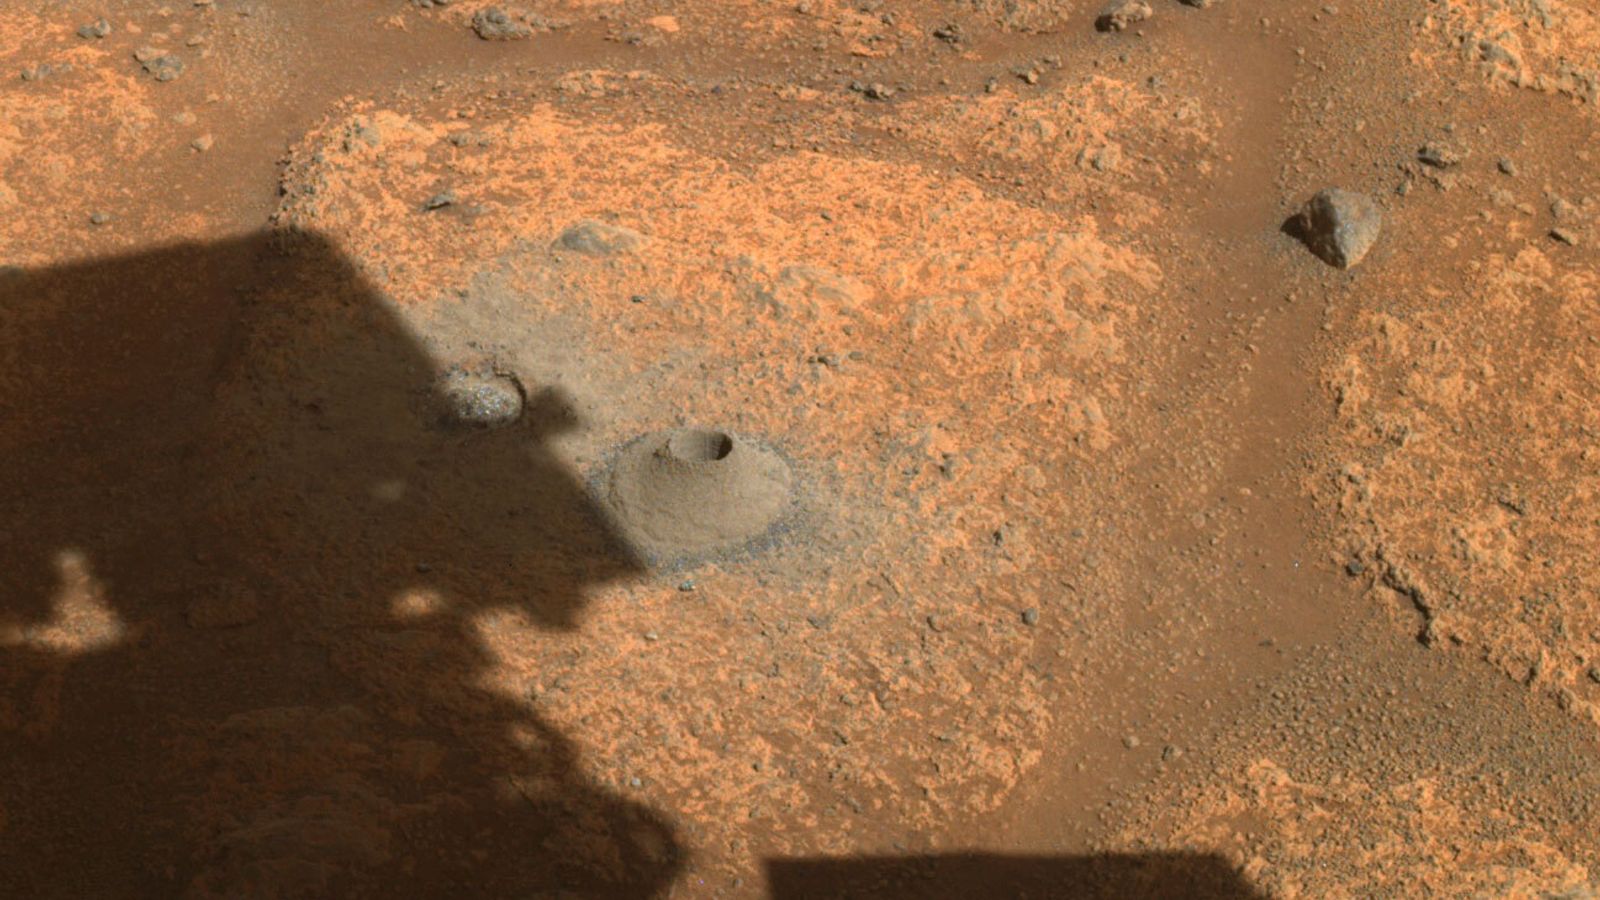 NASA’s Perseverance rover comes up empty after first Mars drilling try